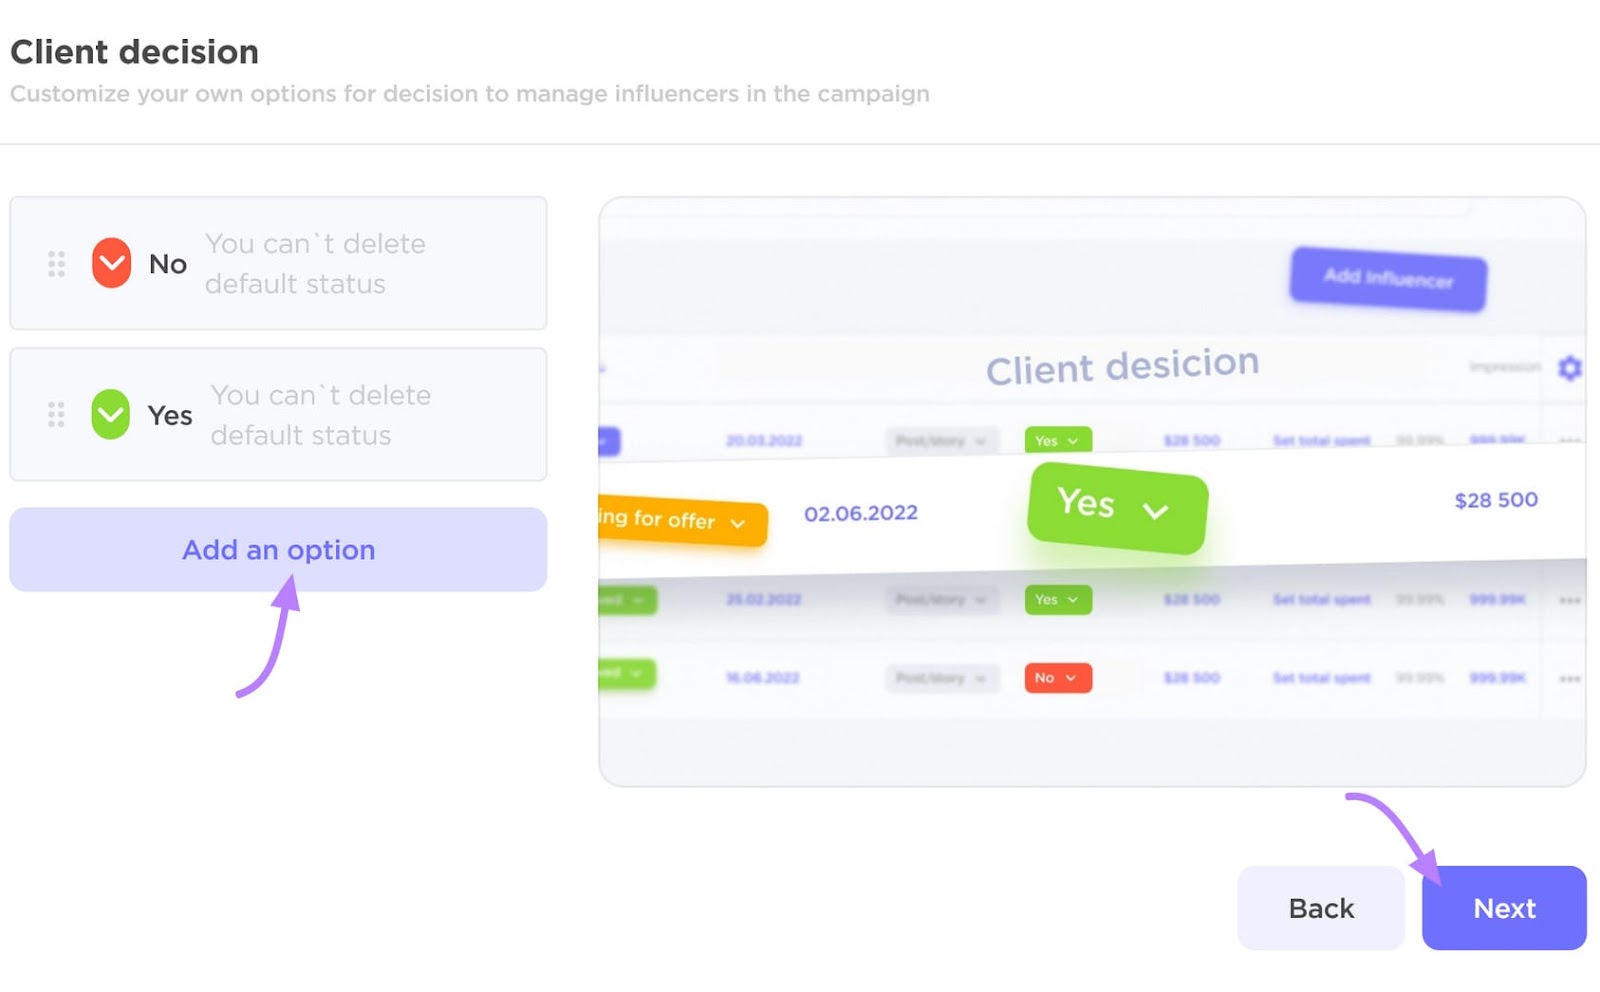 Influencer Analytics screen showing client decision options with buttons for adding an option and navigating forward.